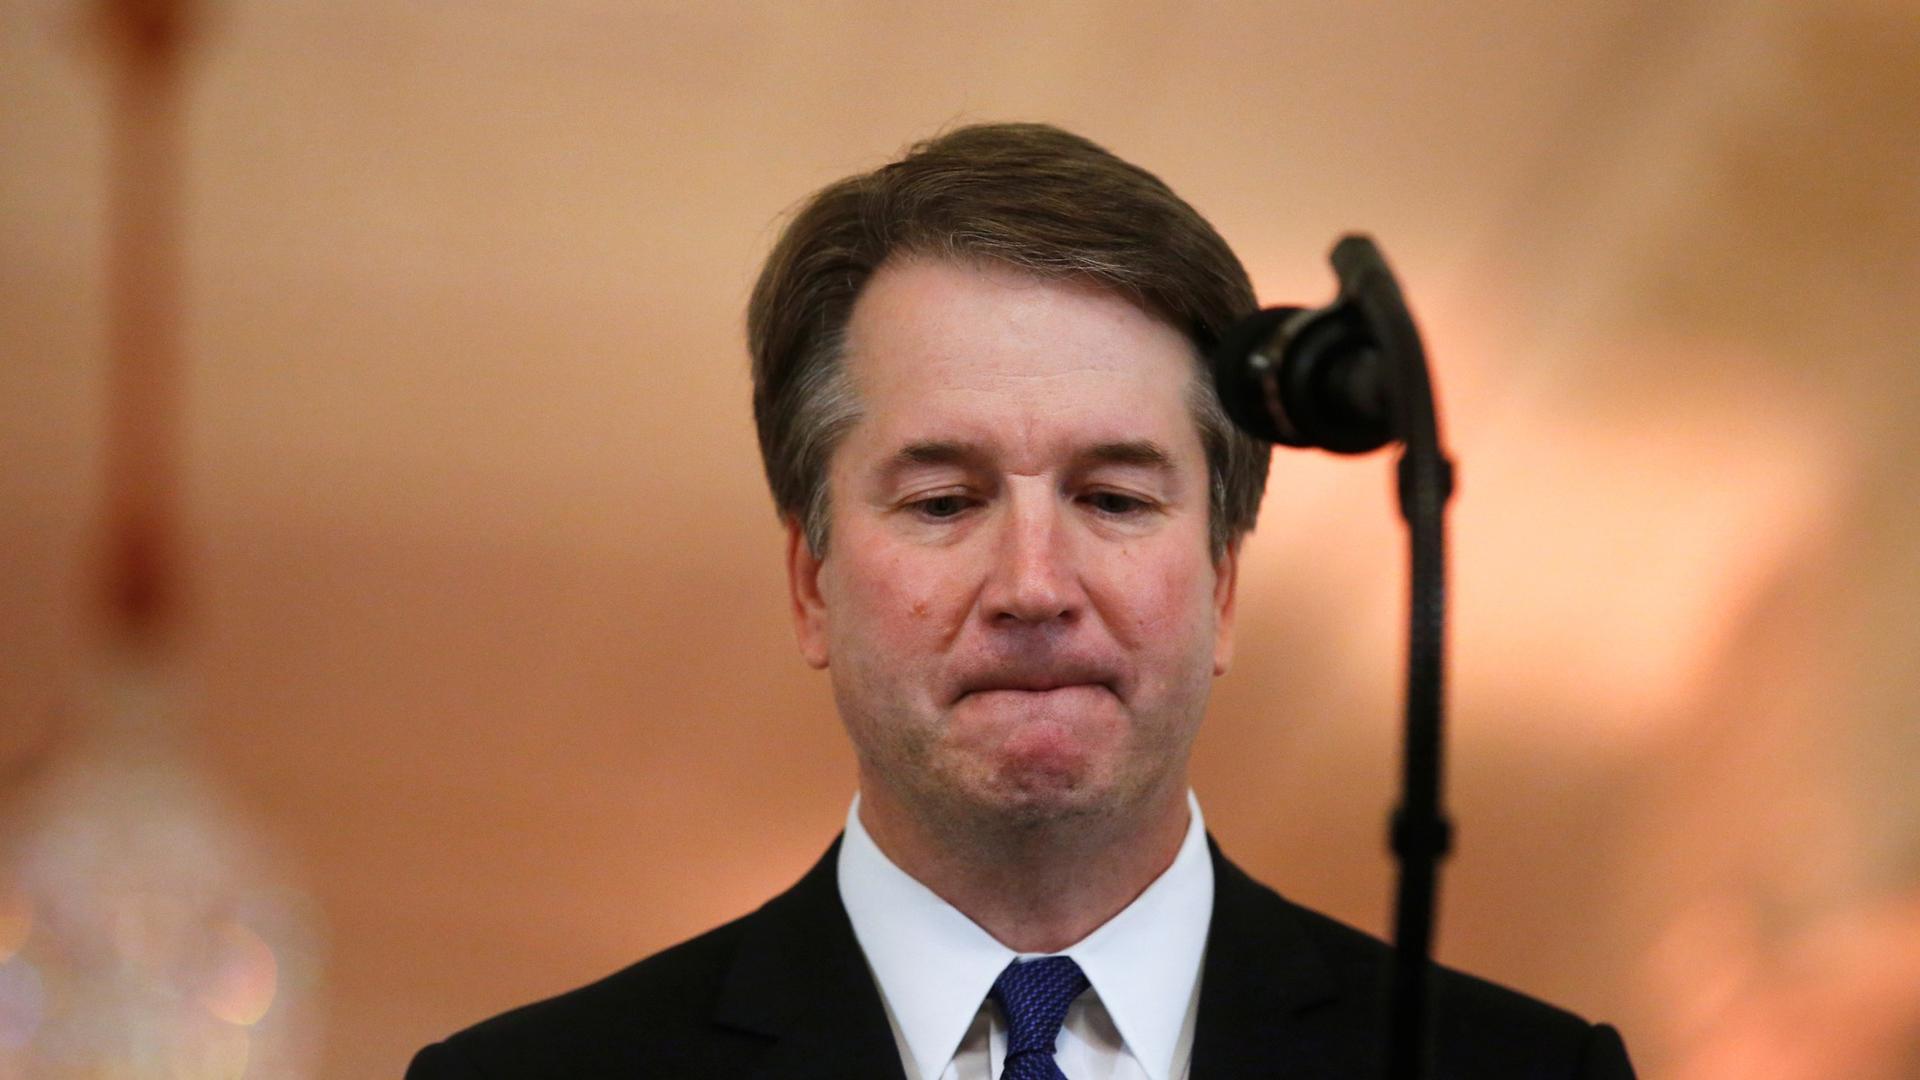 US Supreme Court nominee judge Brett Kavanaugh is shown looking down at a microphone.